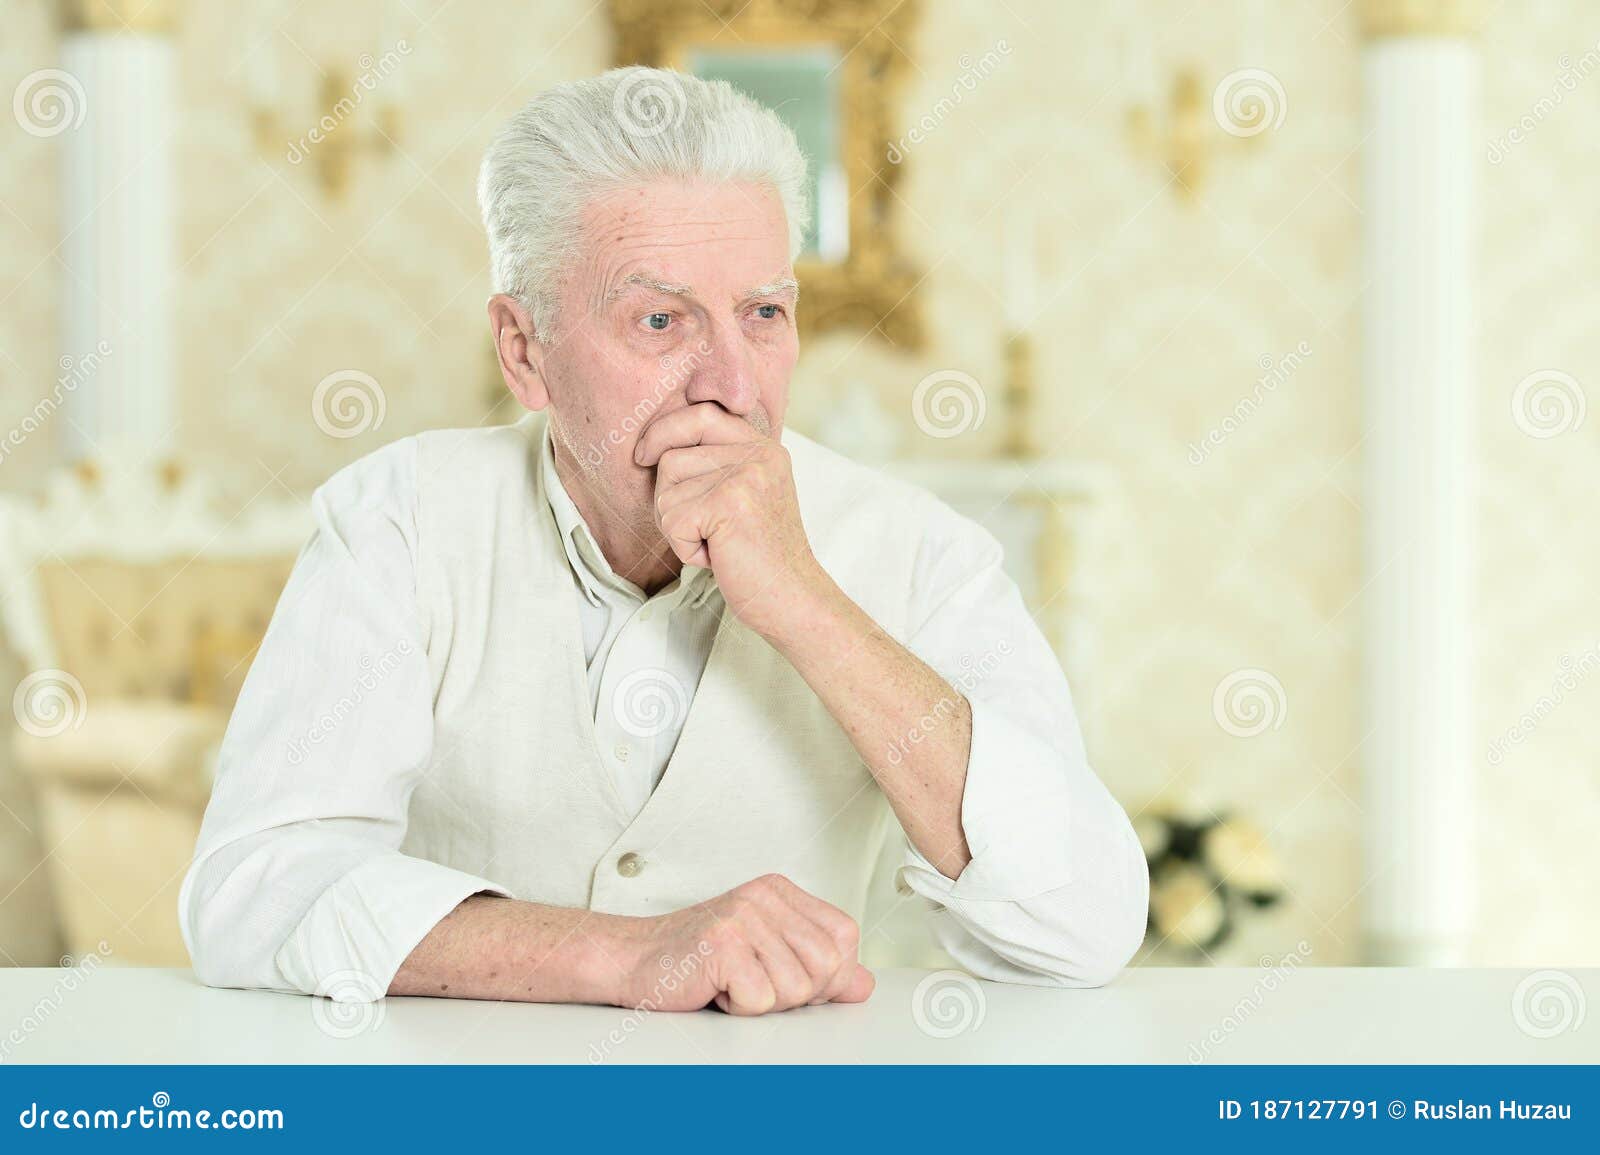 Portrait of Thoughtful Senior Man at Home Stock Image - Image of ...